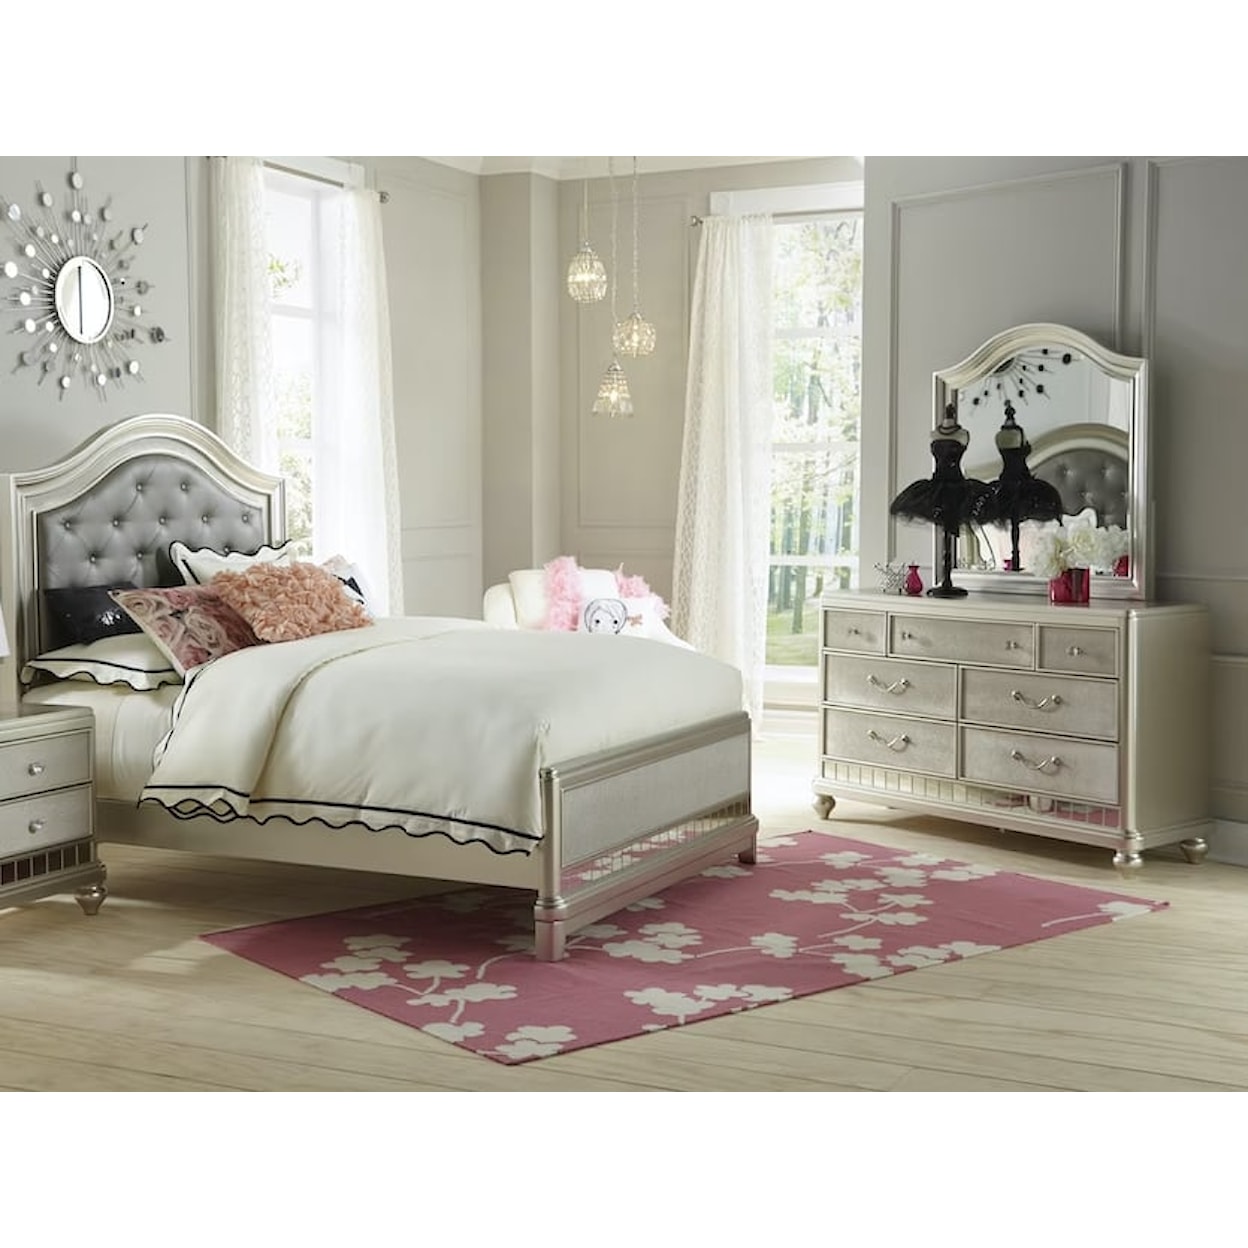 Samuel Lawrence Lil Diva Full 5-PC Bedroom Group with Mattress Set